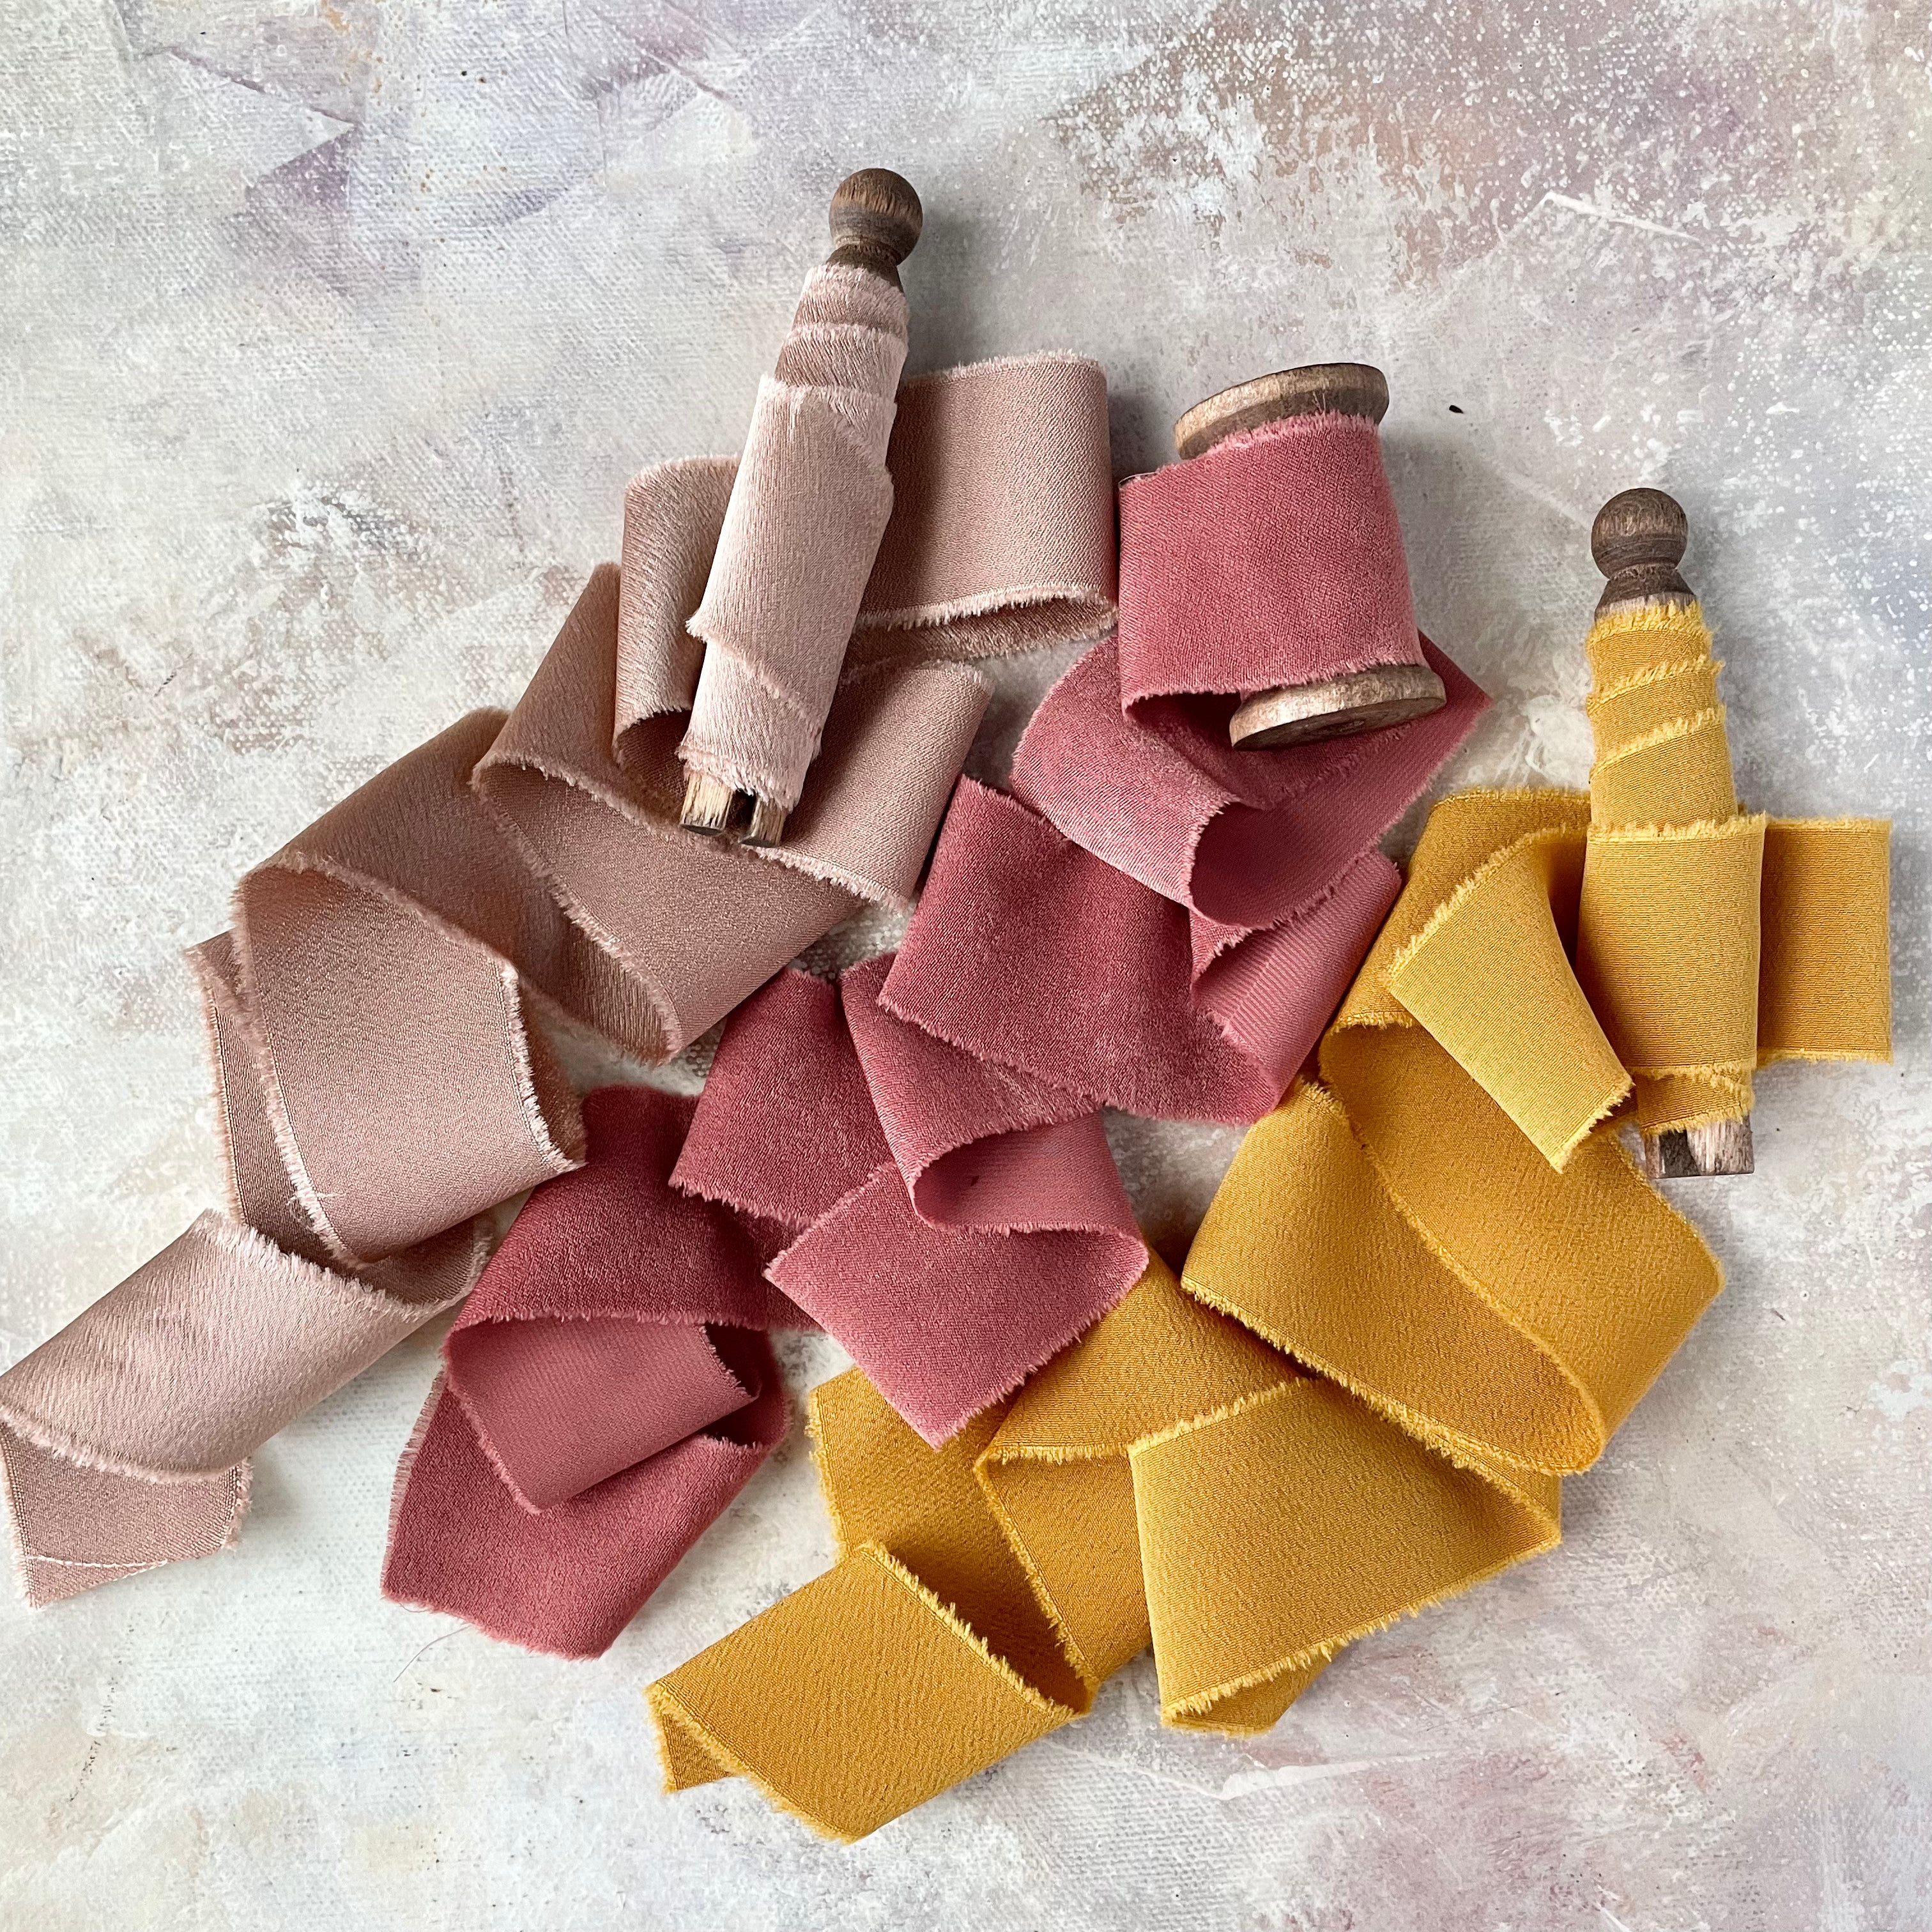 3 spools of ribbon included in the Rust & Terracotta Flat Lay Prop Styling Kit - Wedding Flat lay props from Champagne & GRIT